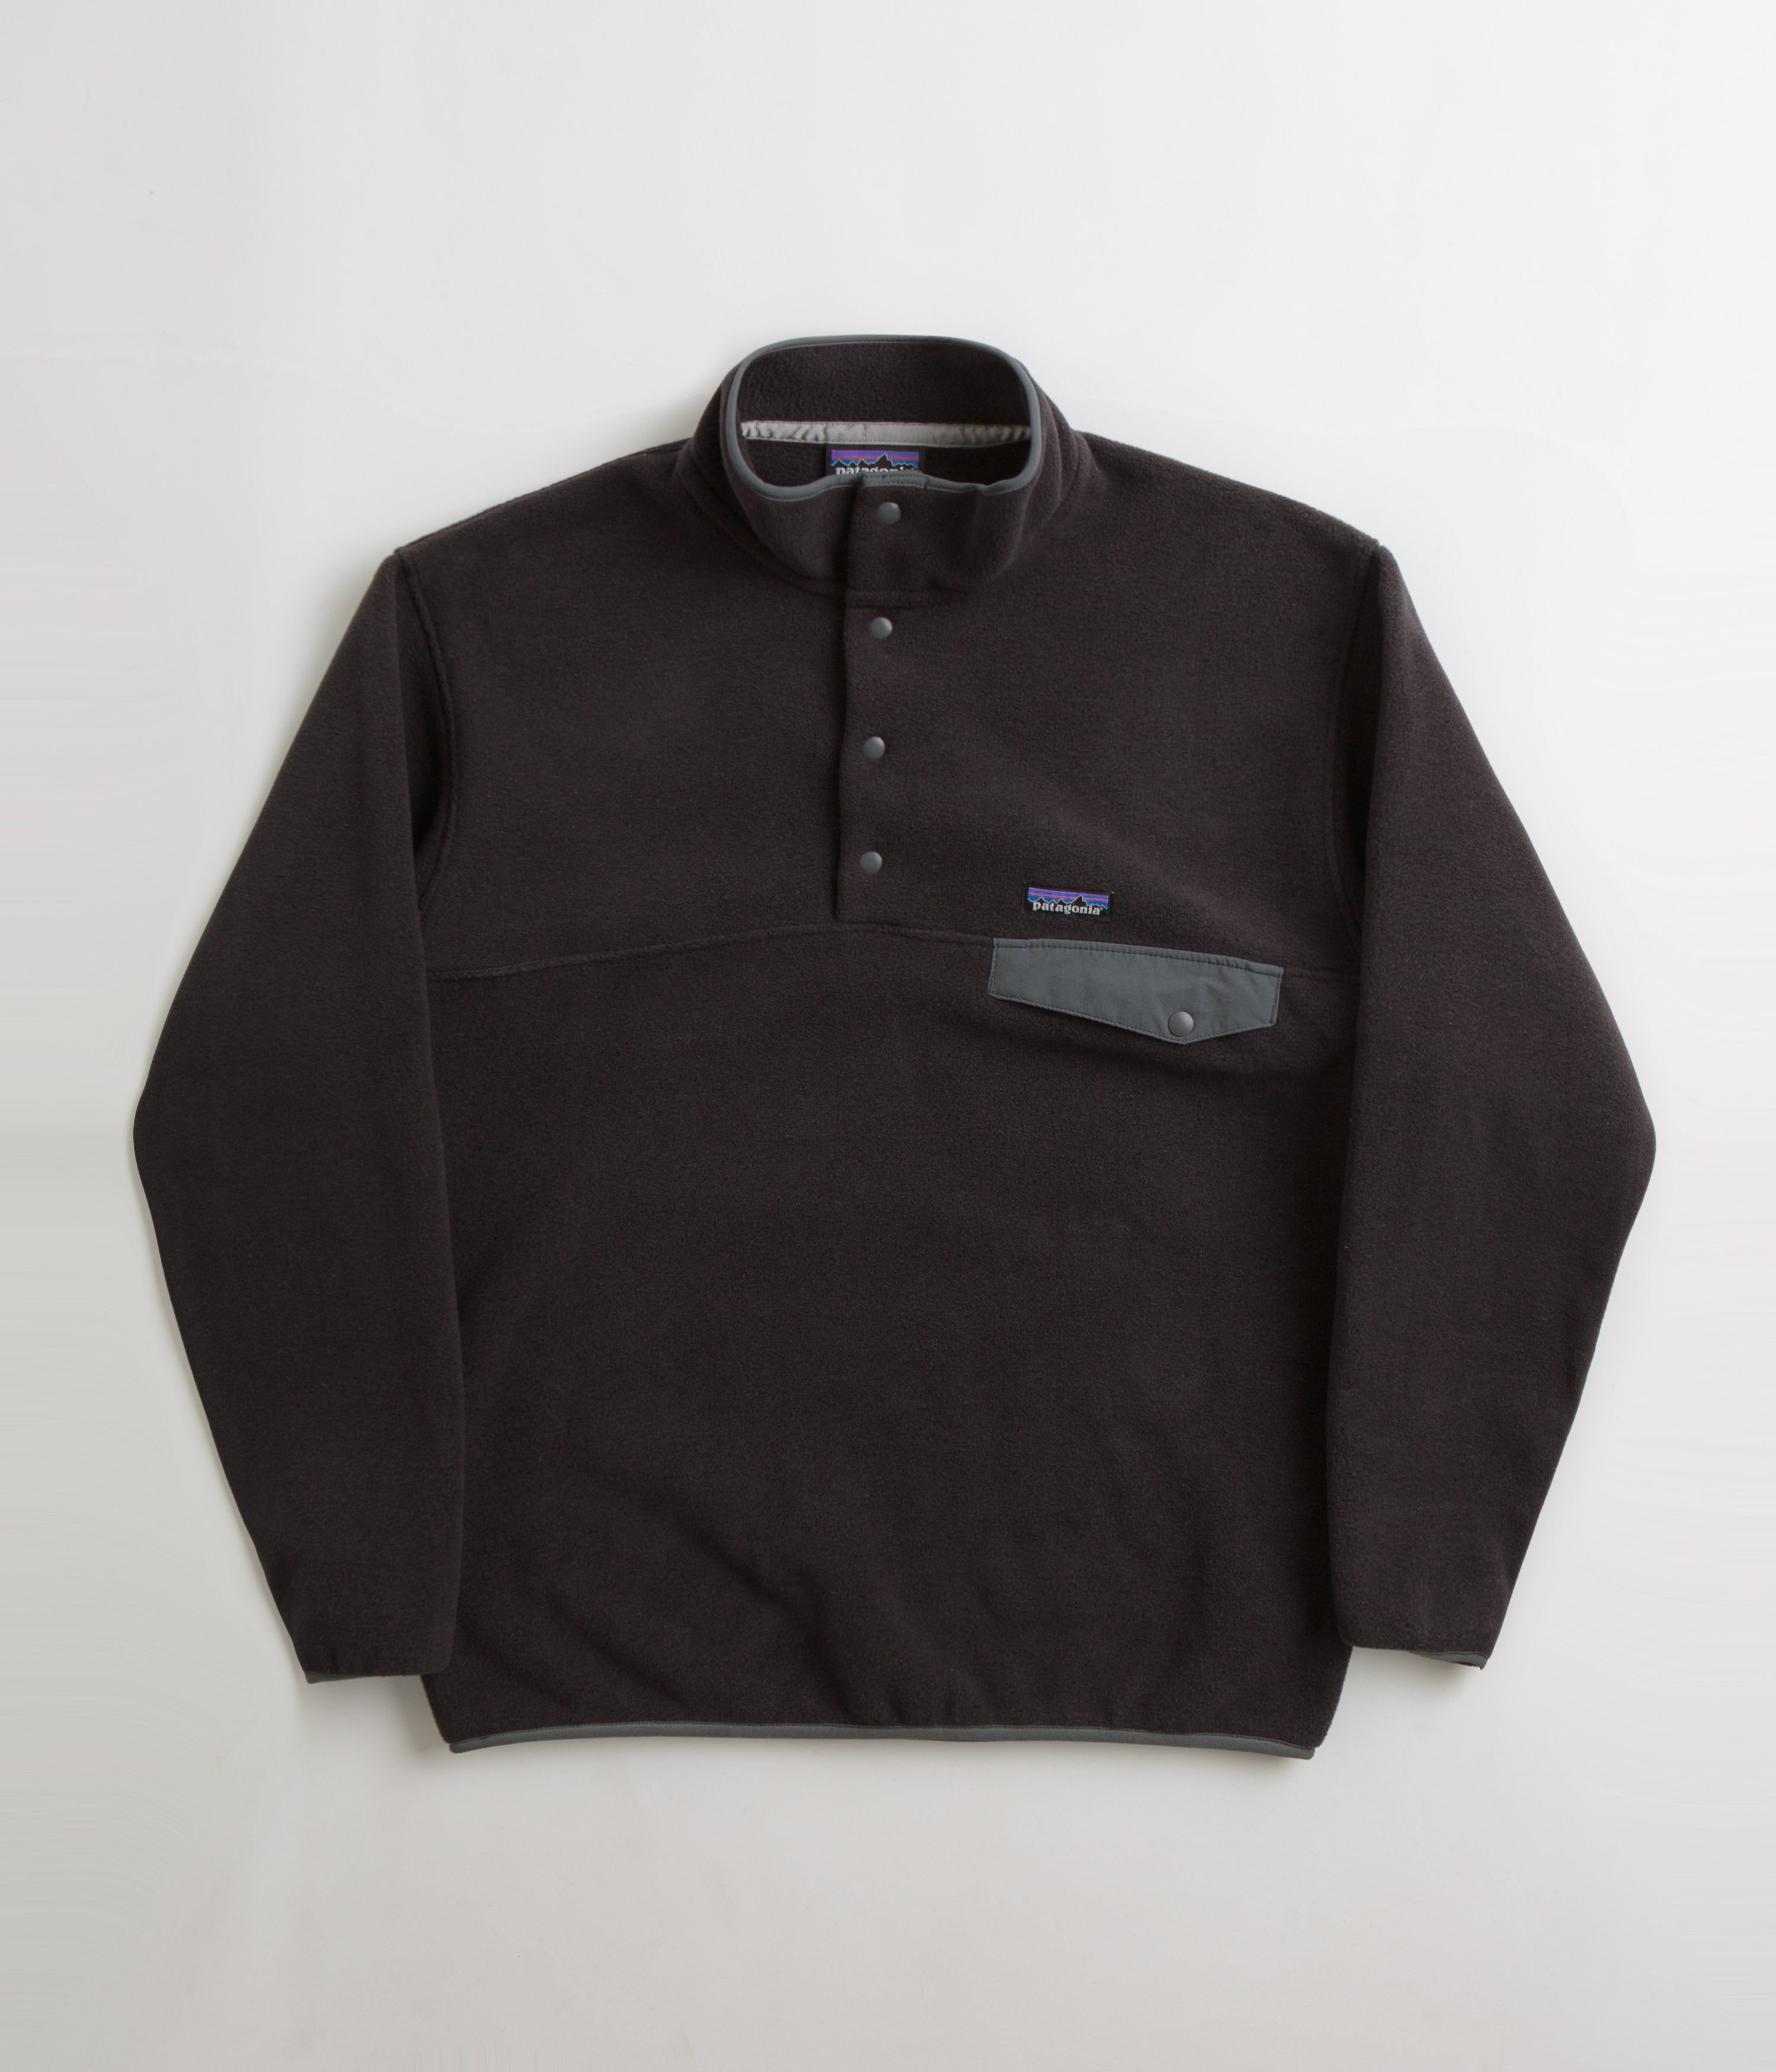 T Pullover Fleece - Patagonia Synchilla Snap - Black / Forge Grey